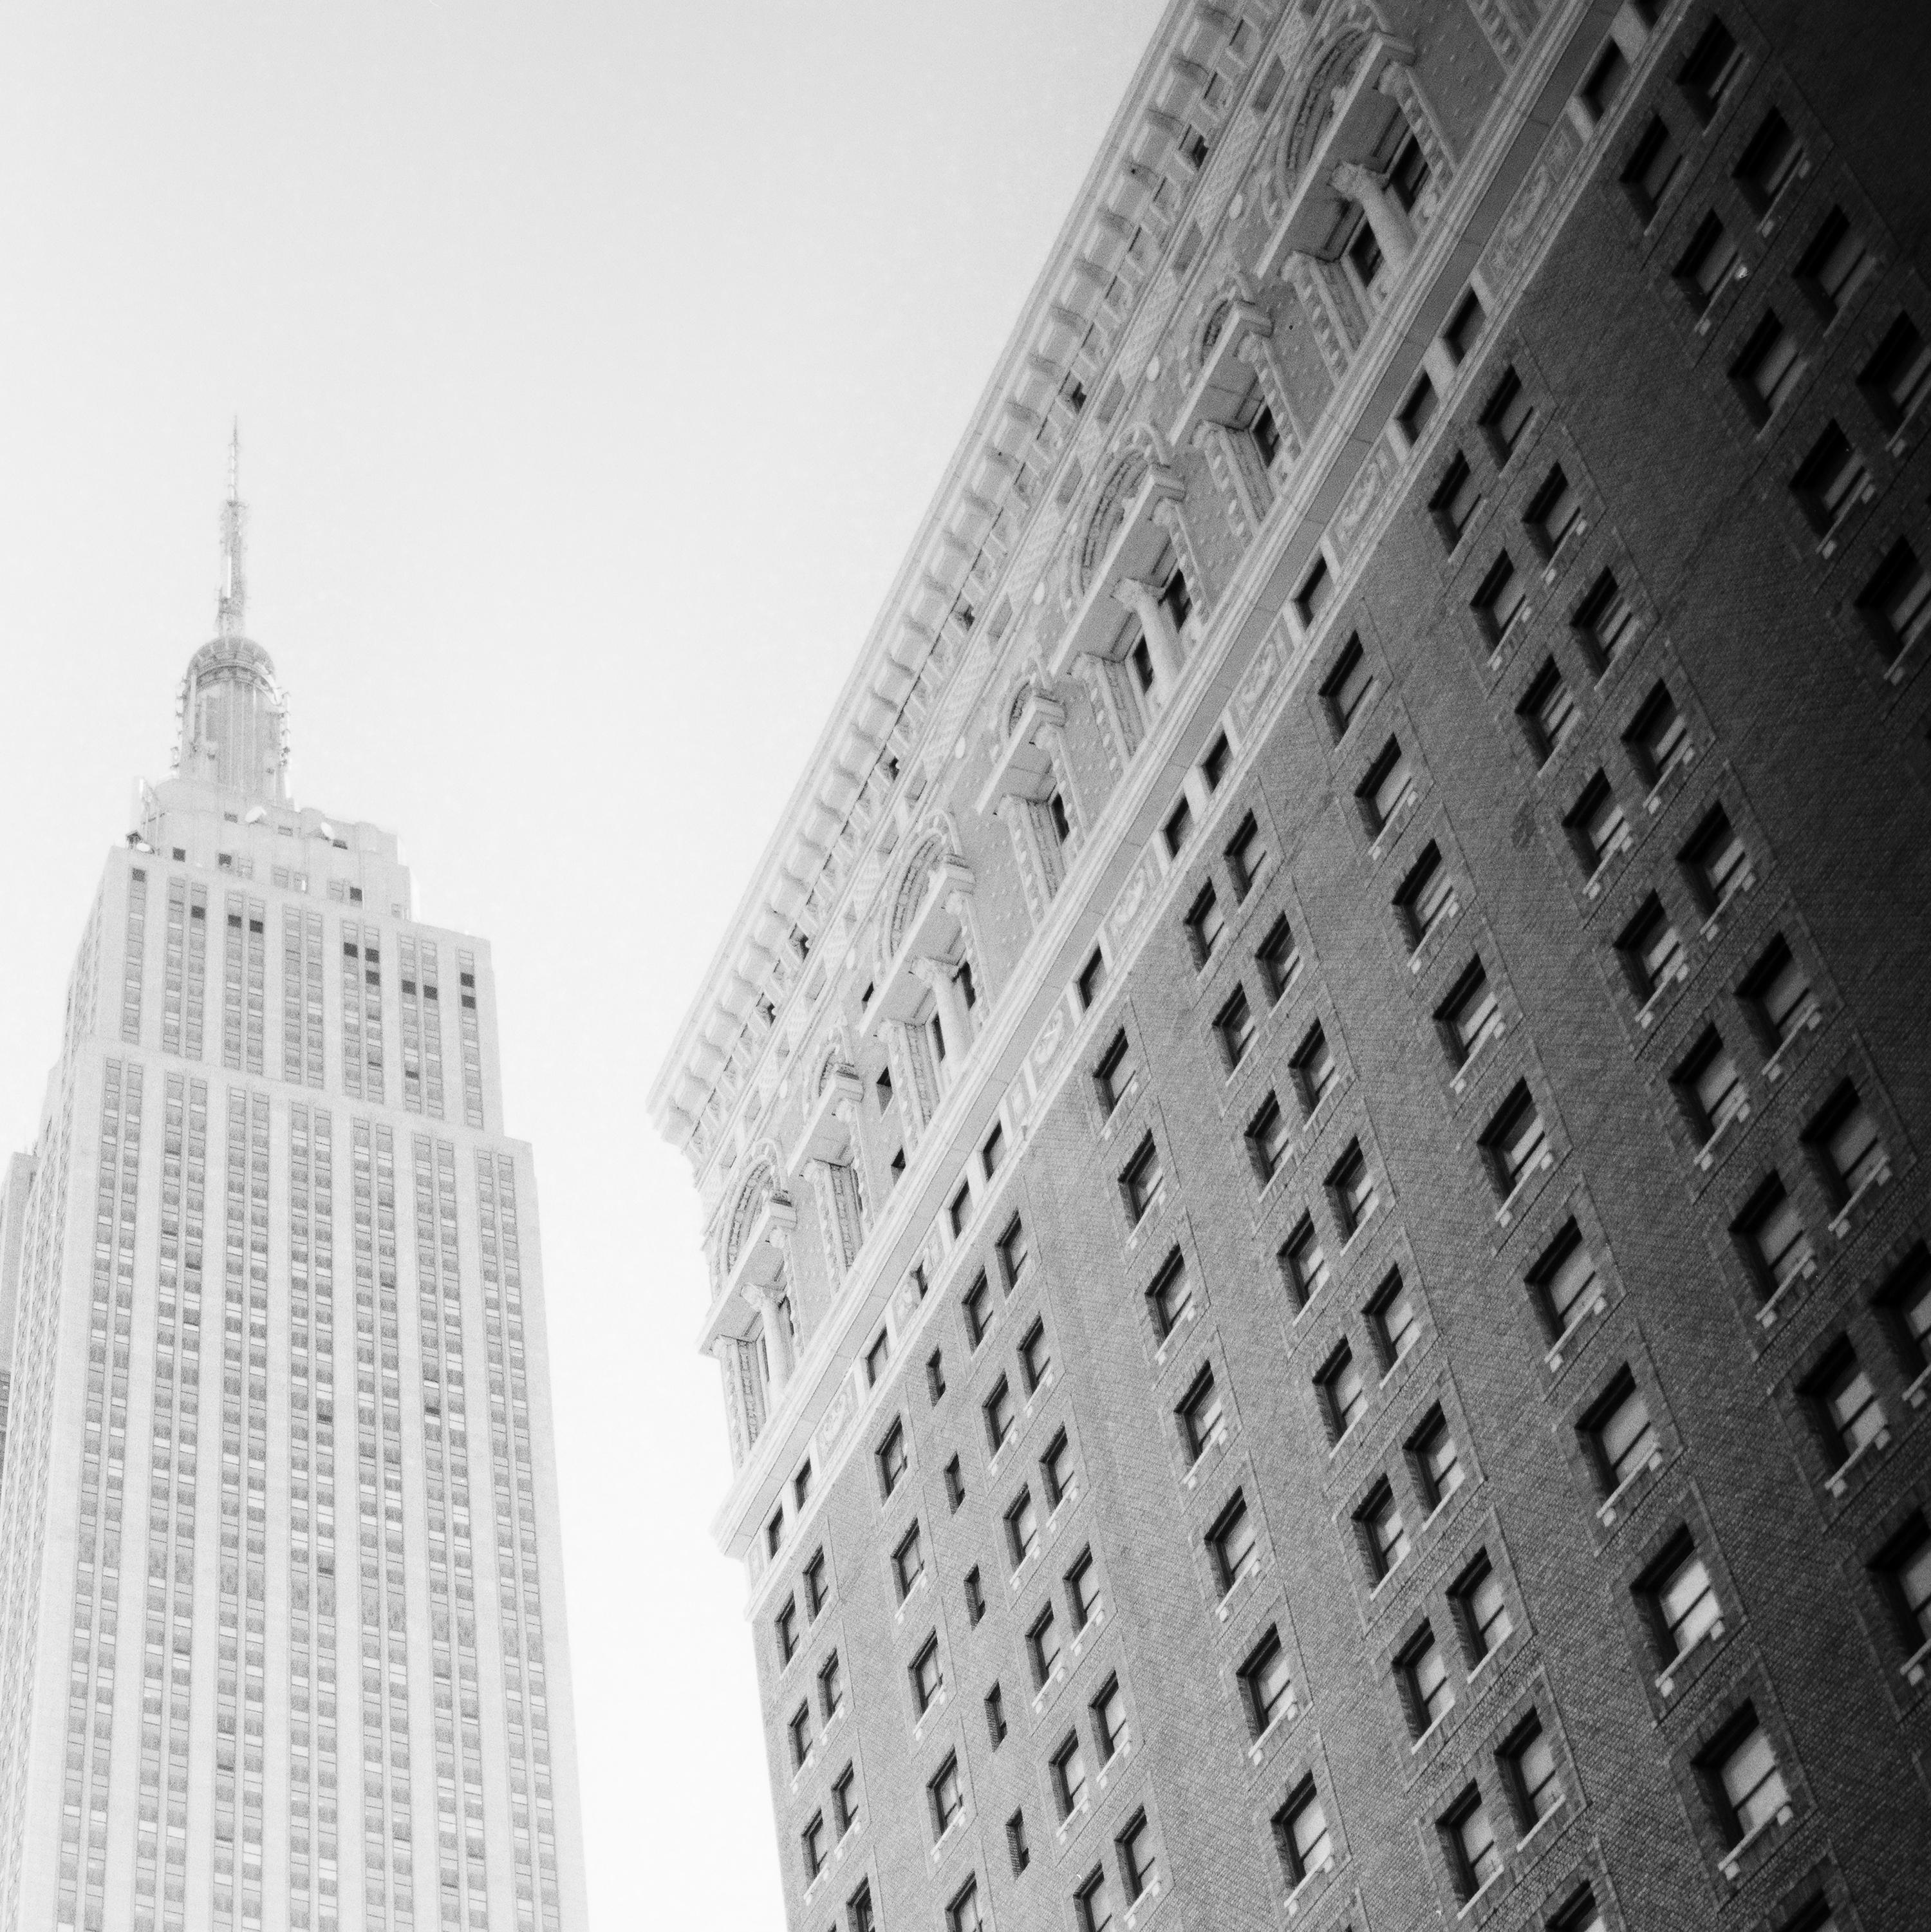 Victorias Secret, Empire State Building, New York, black and white photography For Sale 4